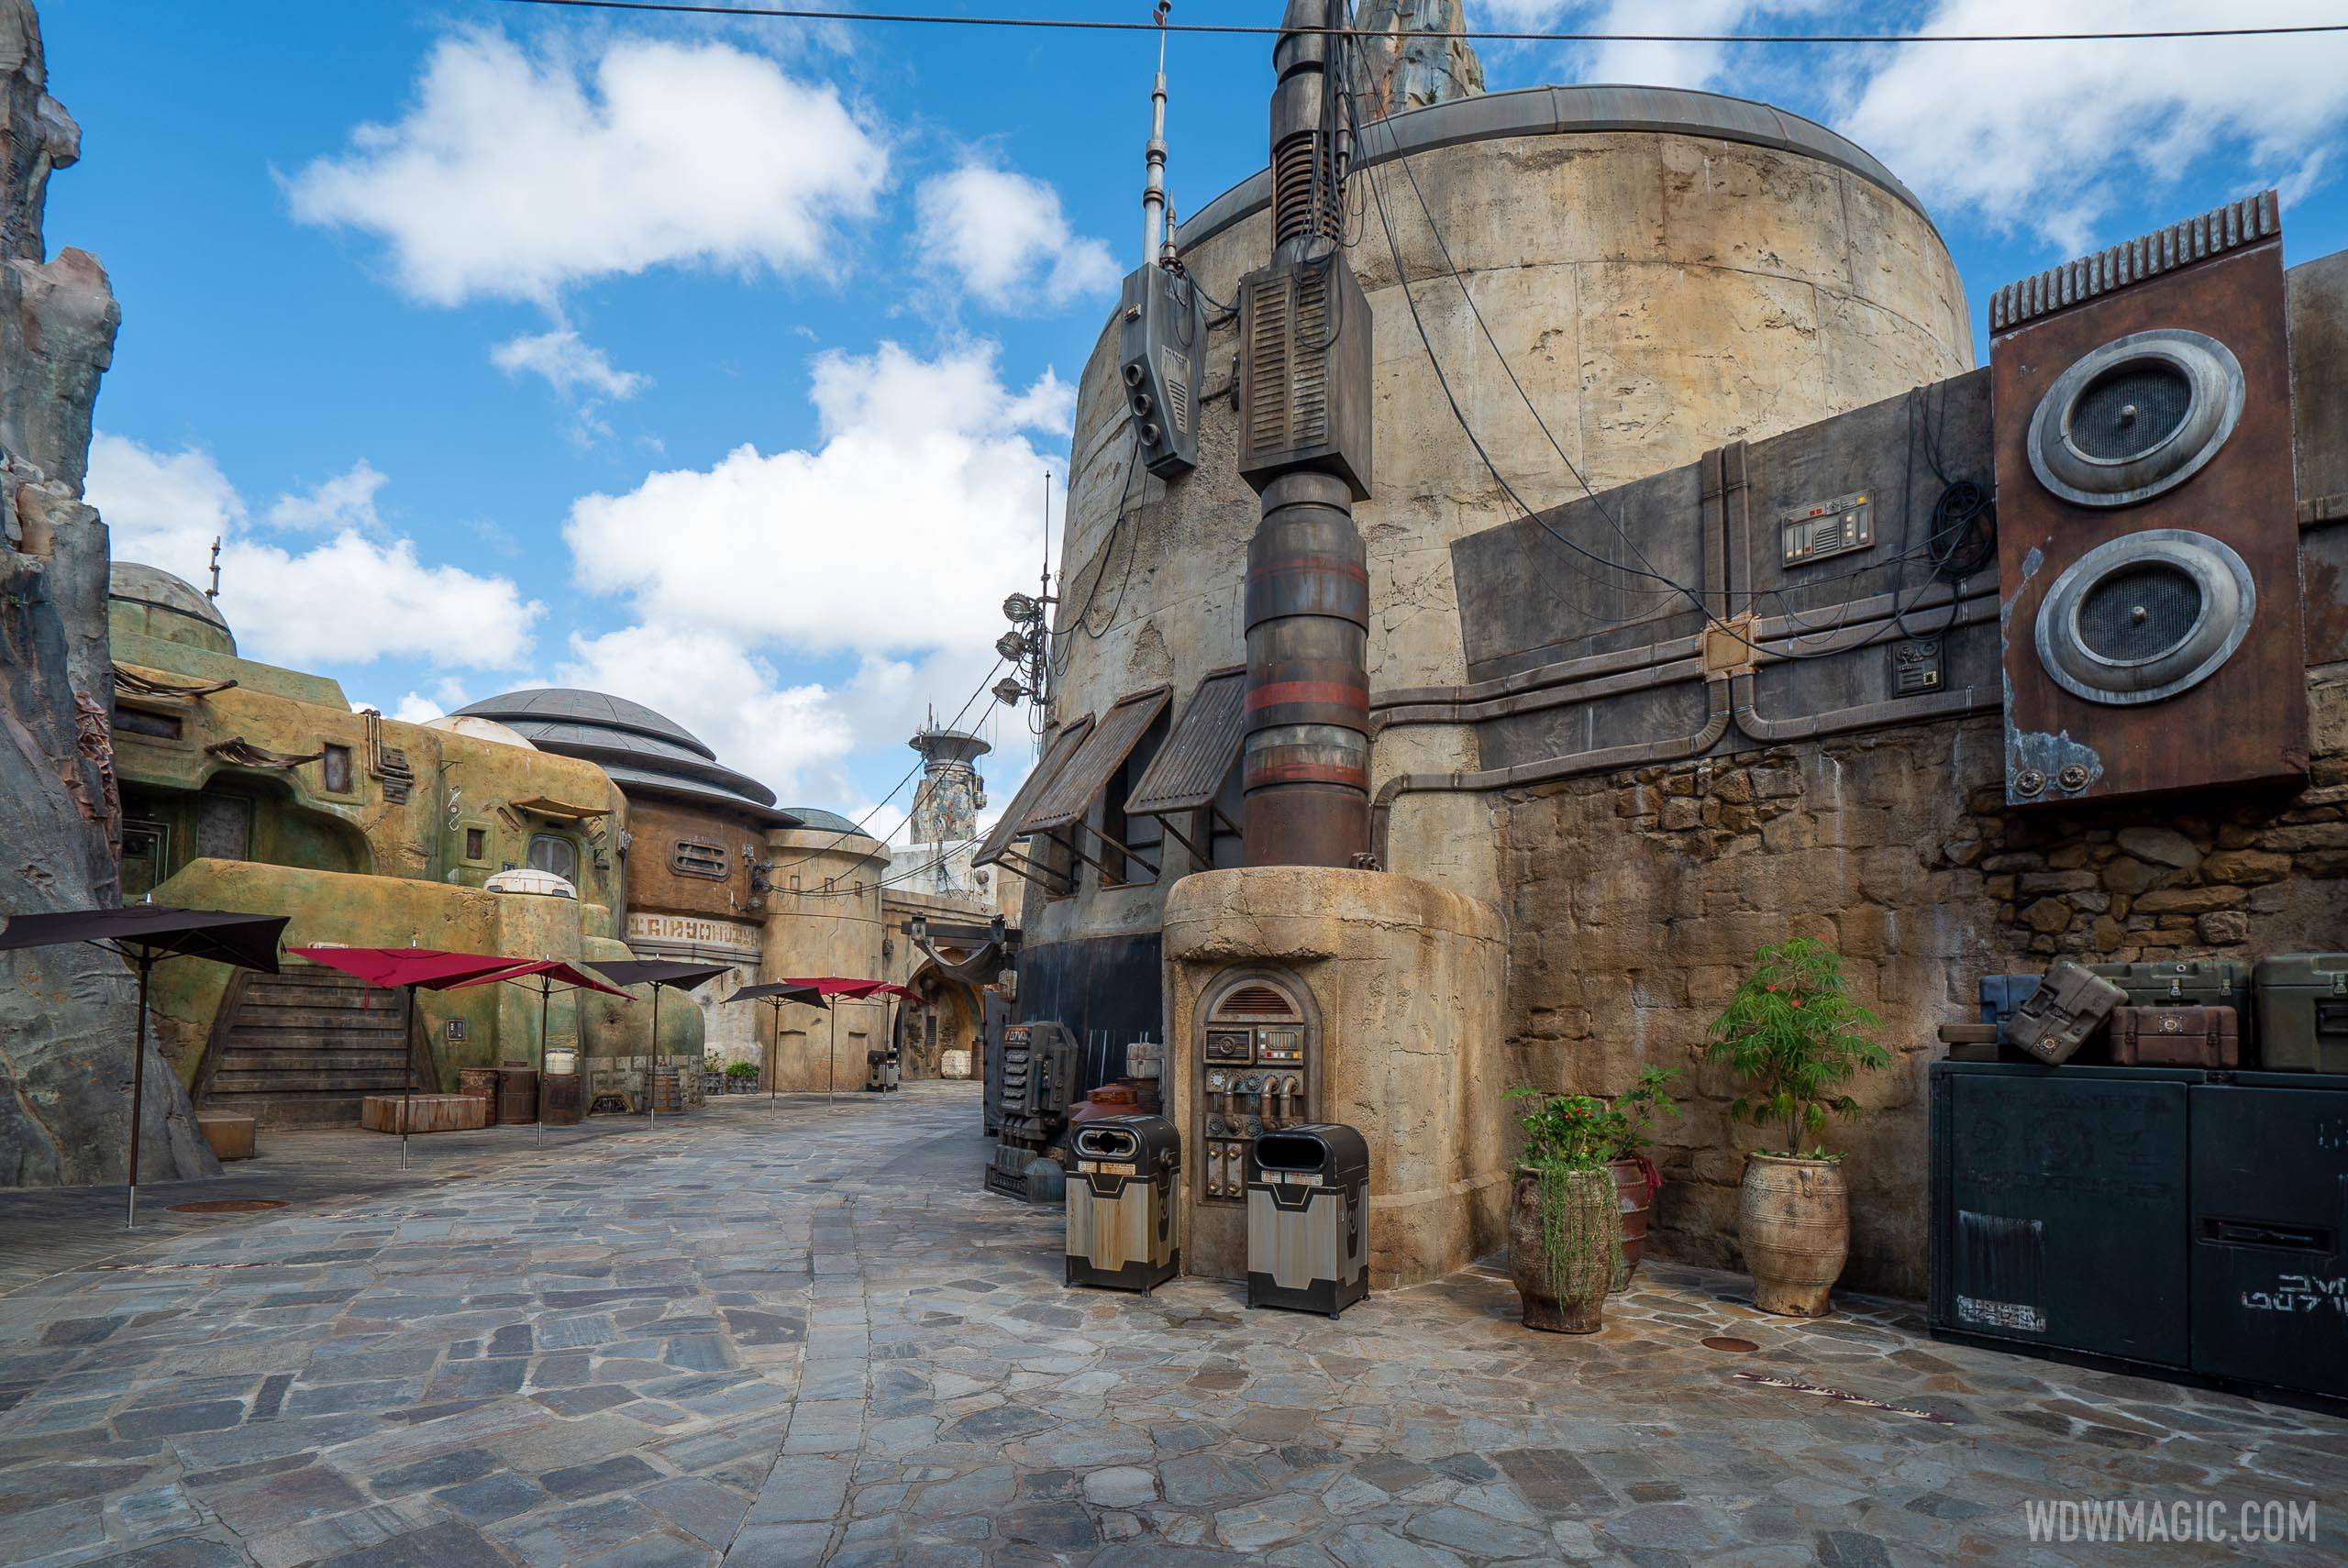 Star Wars Galaxy's Edge early in the day